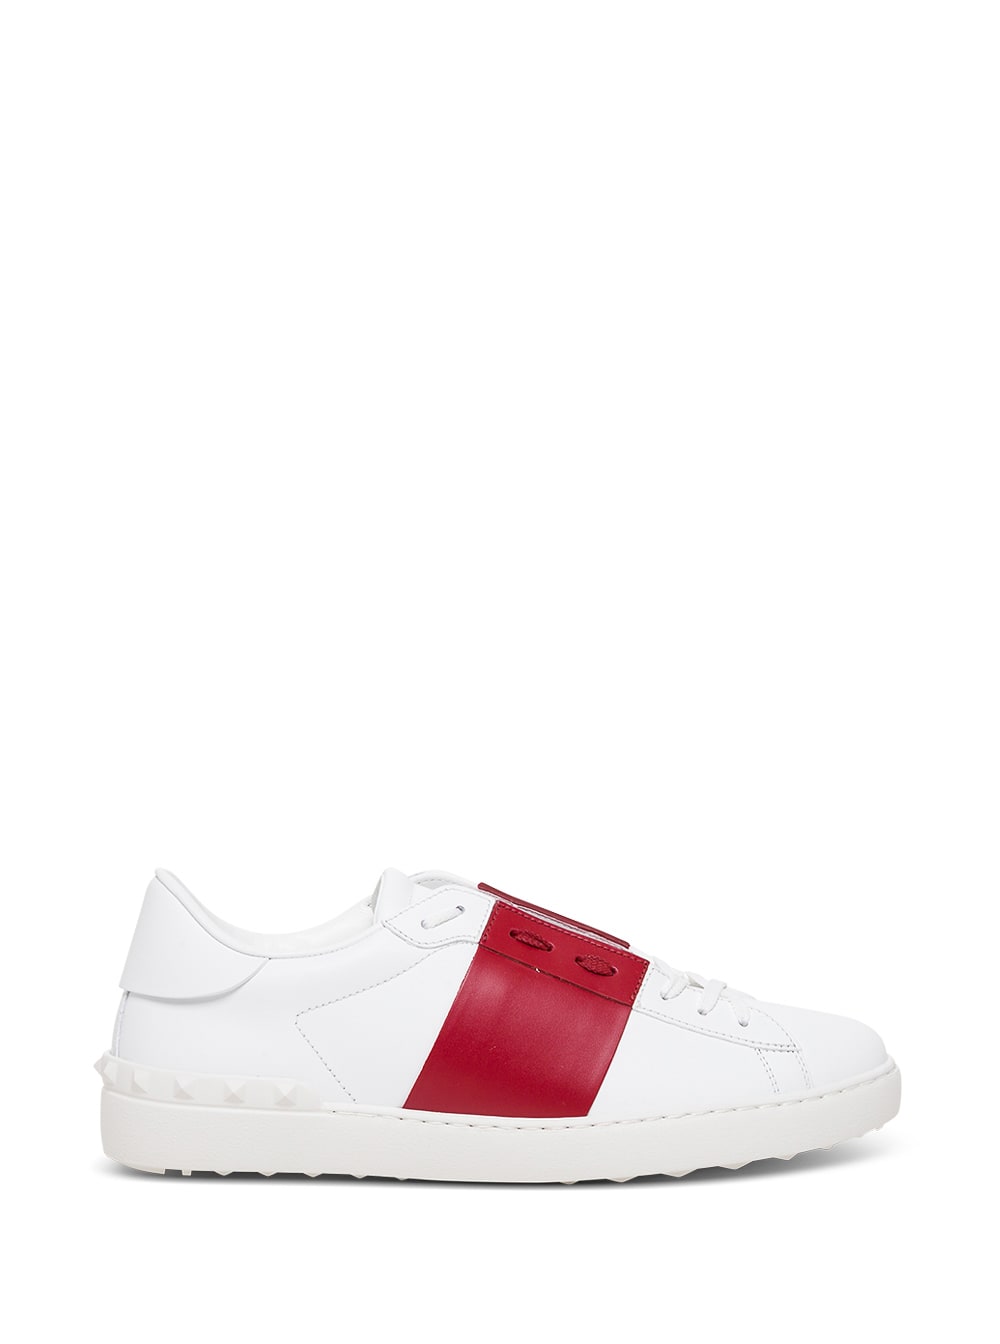 Valentino Garavani Open Leather Sneakers With Red Side Band